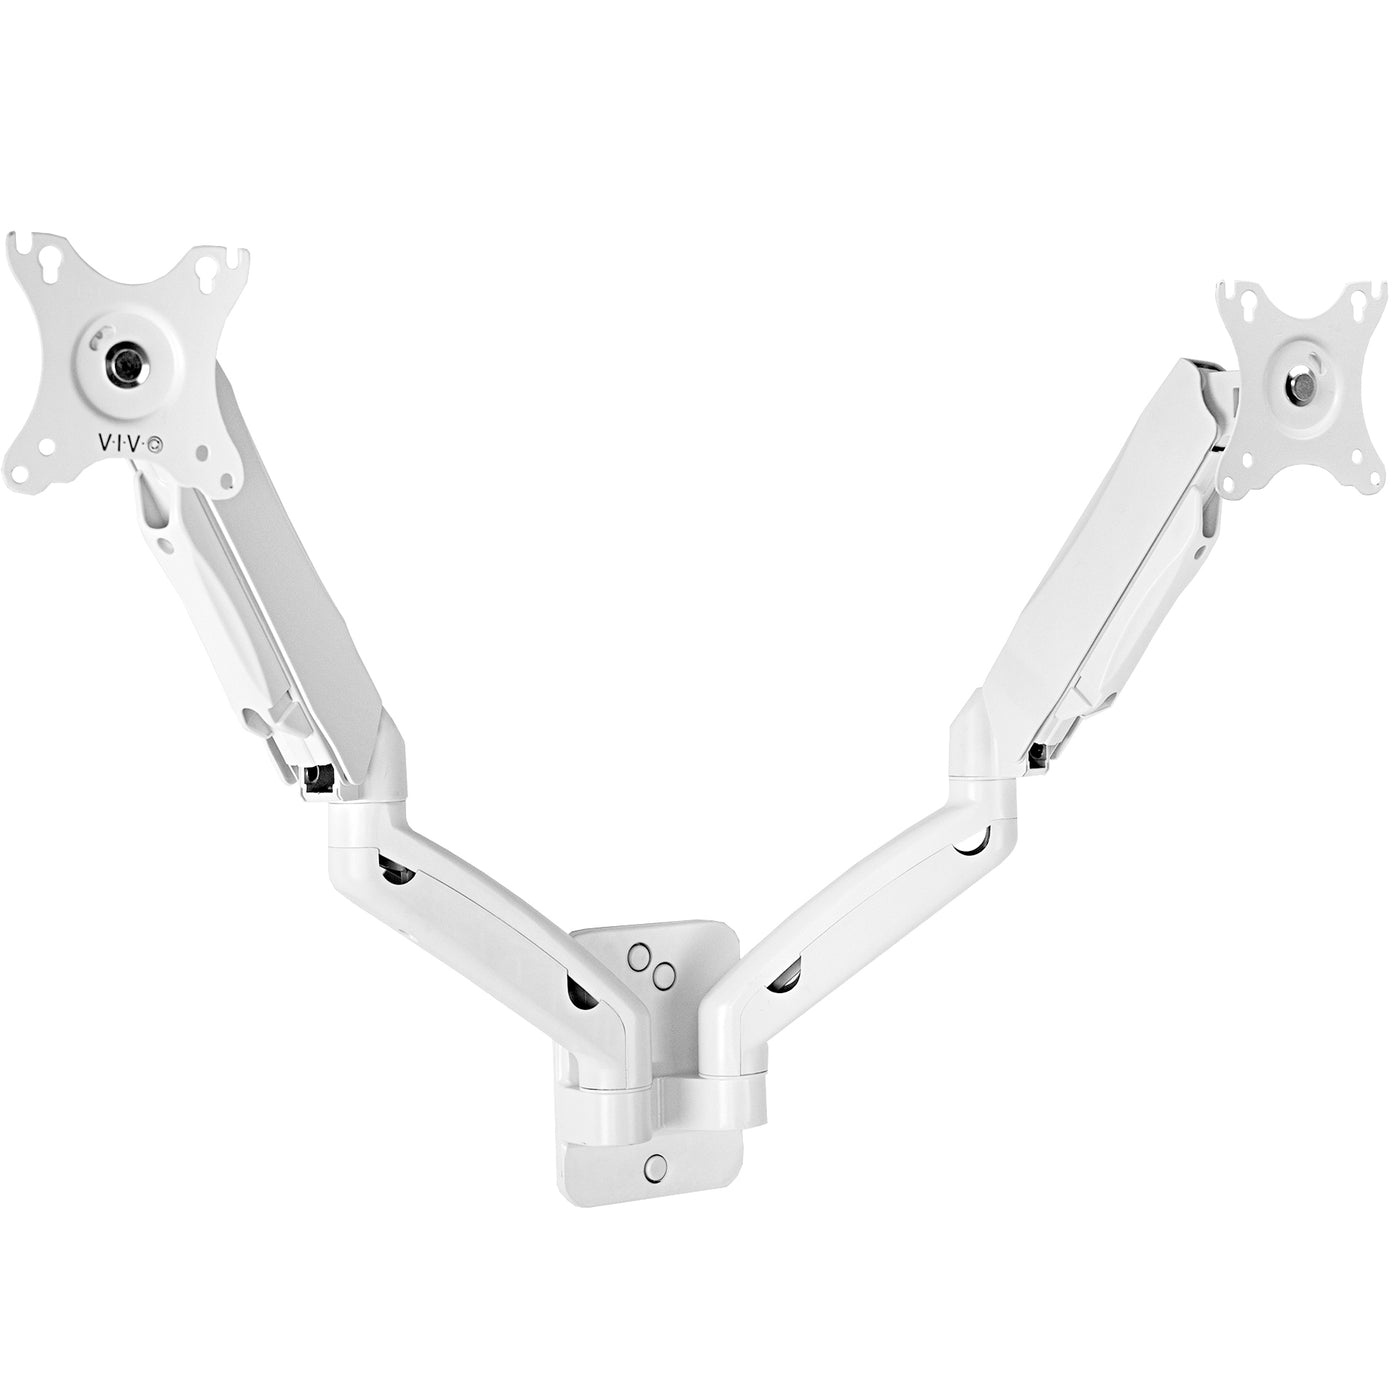 Sturdy adjustable pneumatic arm dual monitor ergonomic wall mount for office workstation.